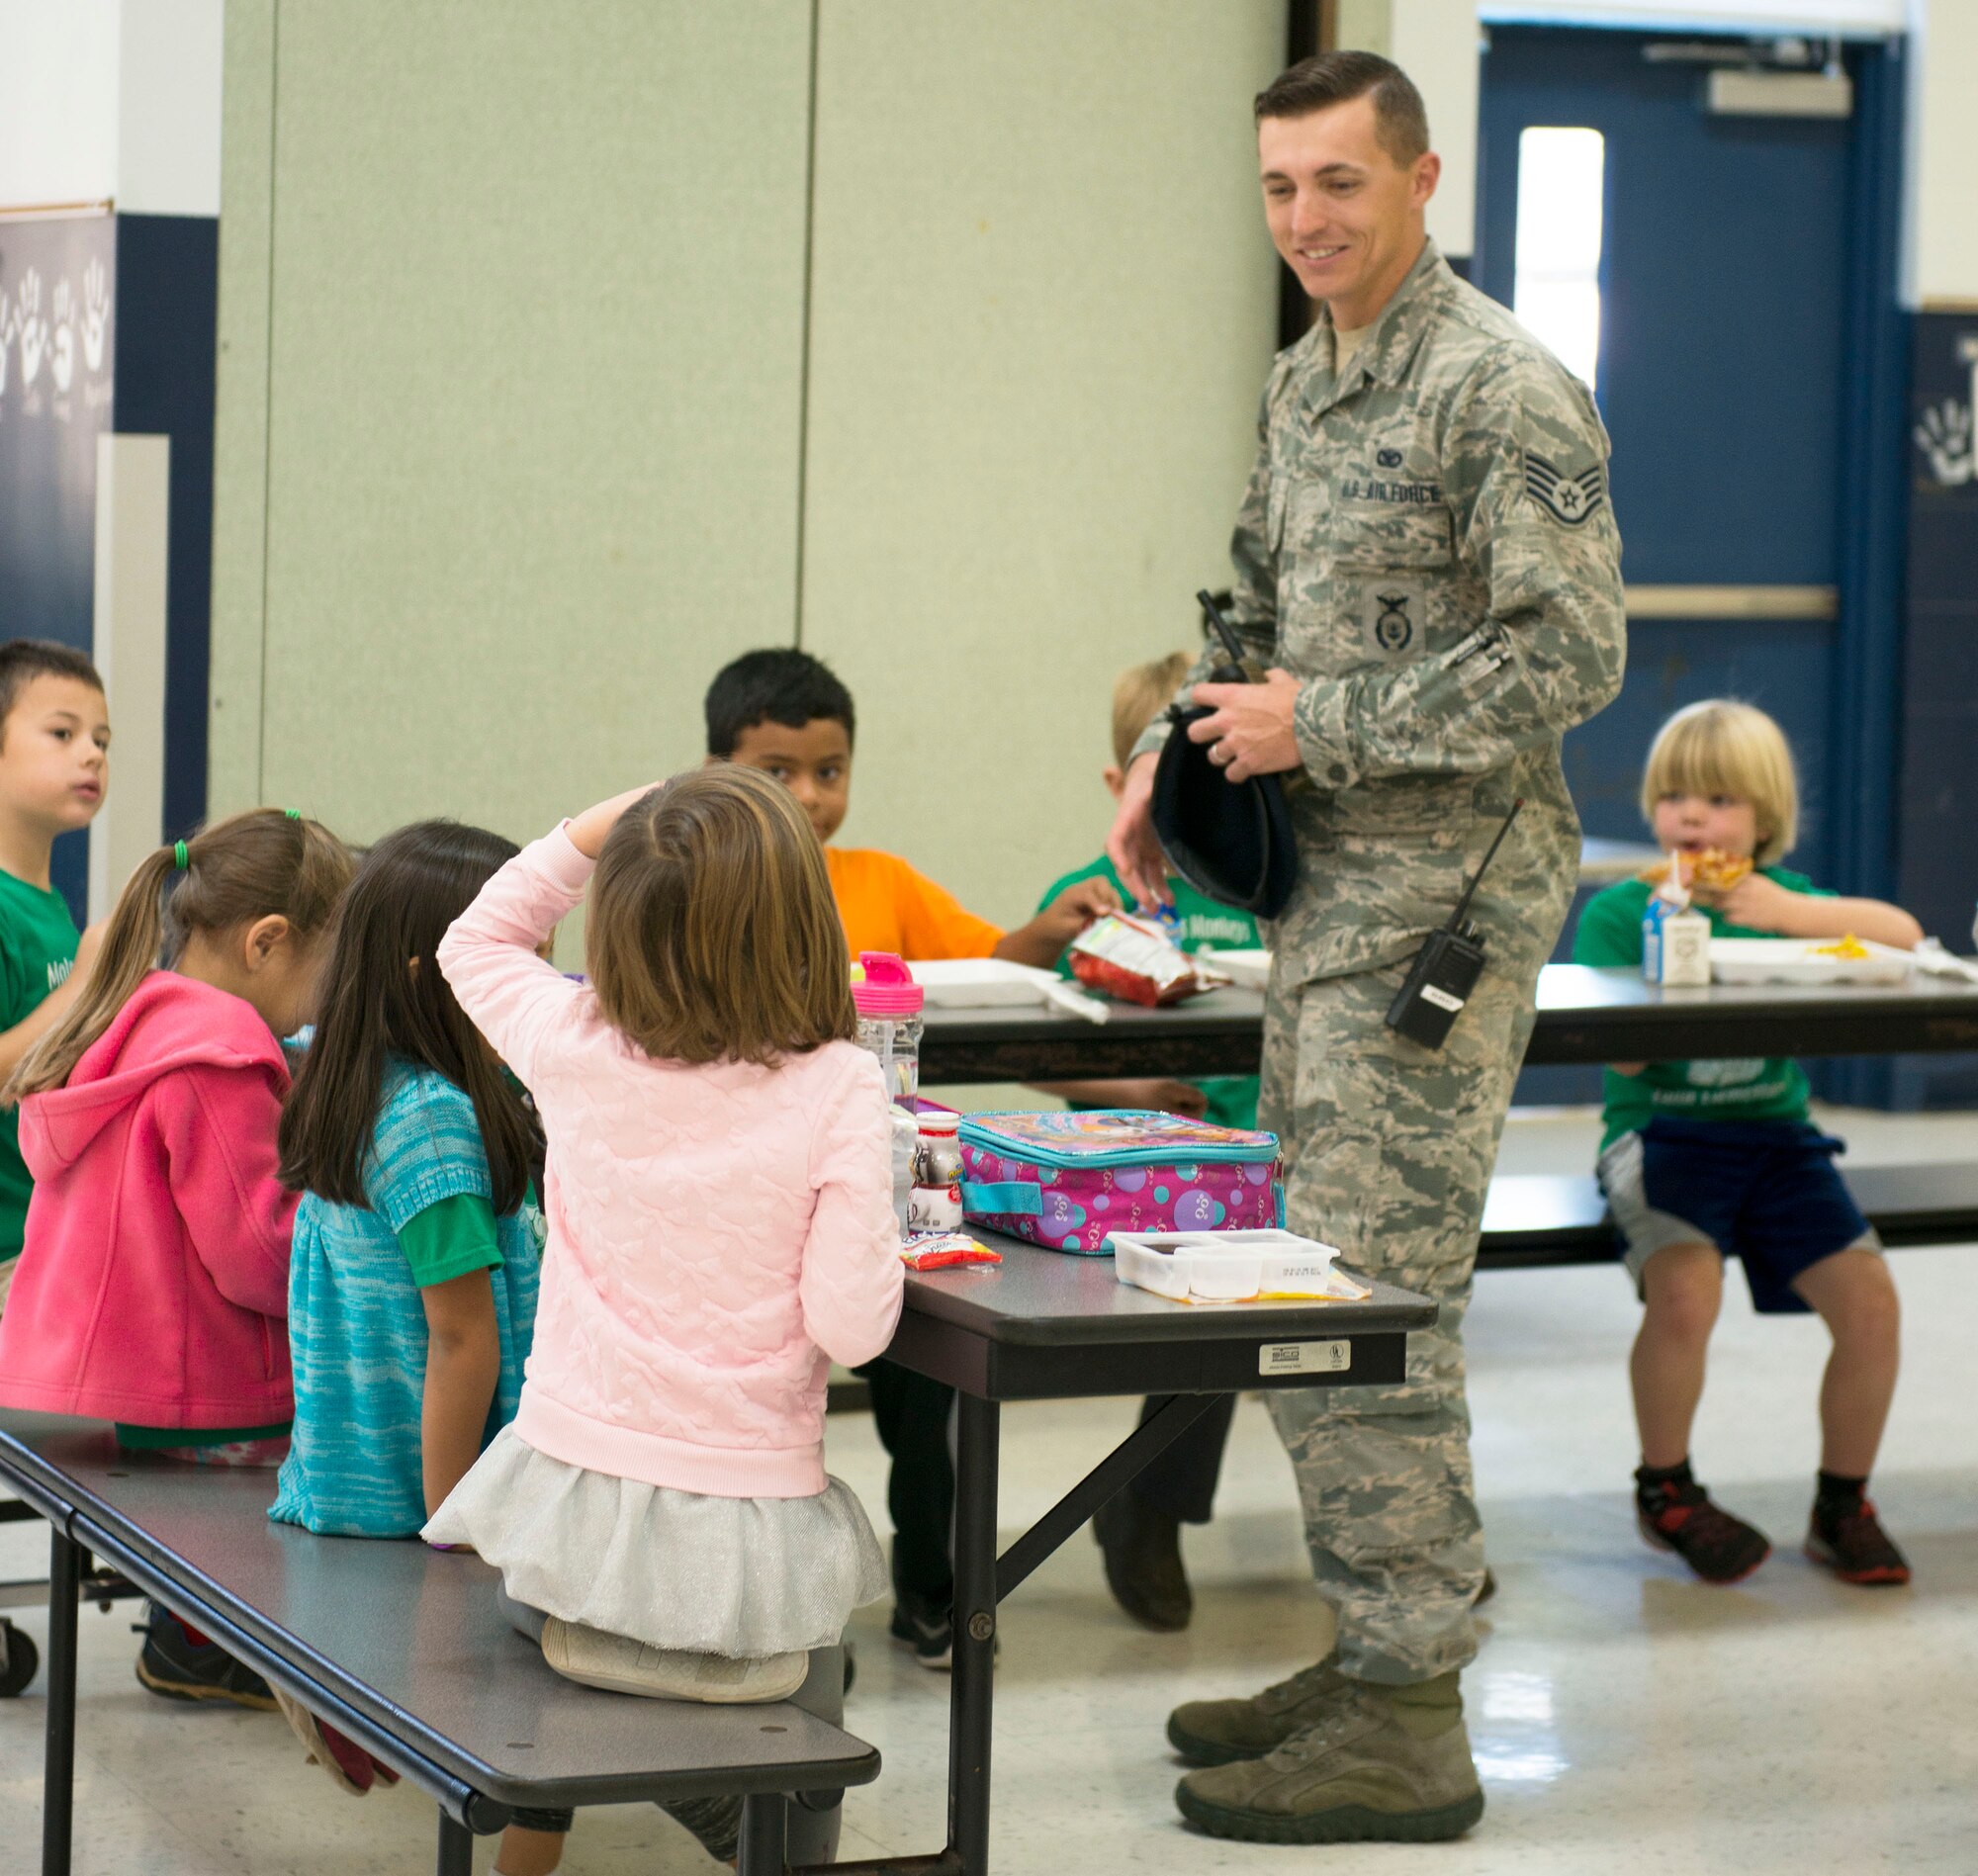 Staff Sgt. Justin Hogg, 96th Security Forces Squadron, visits with students about his new position over their lunch break Jan. 13 at Eglin Air Force Base, Fla.  Hogg is the School Resource Officer for Eglin Elementary School and is in charge of providing security and crime prevention services on the campus. (U.S. Air Force photo/Cheryl Sawyers)